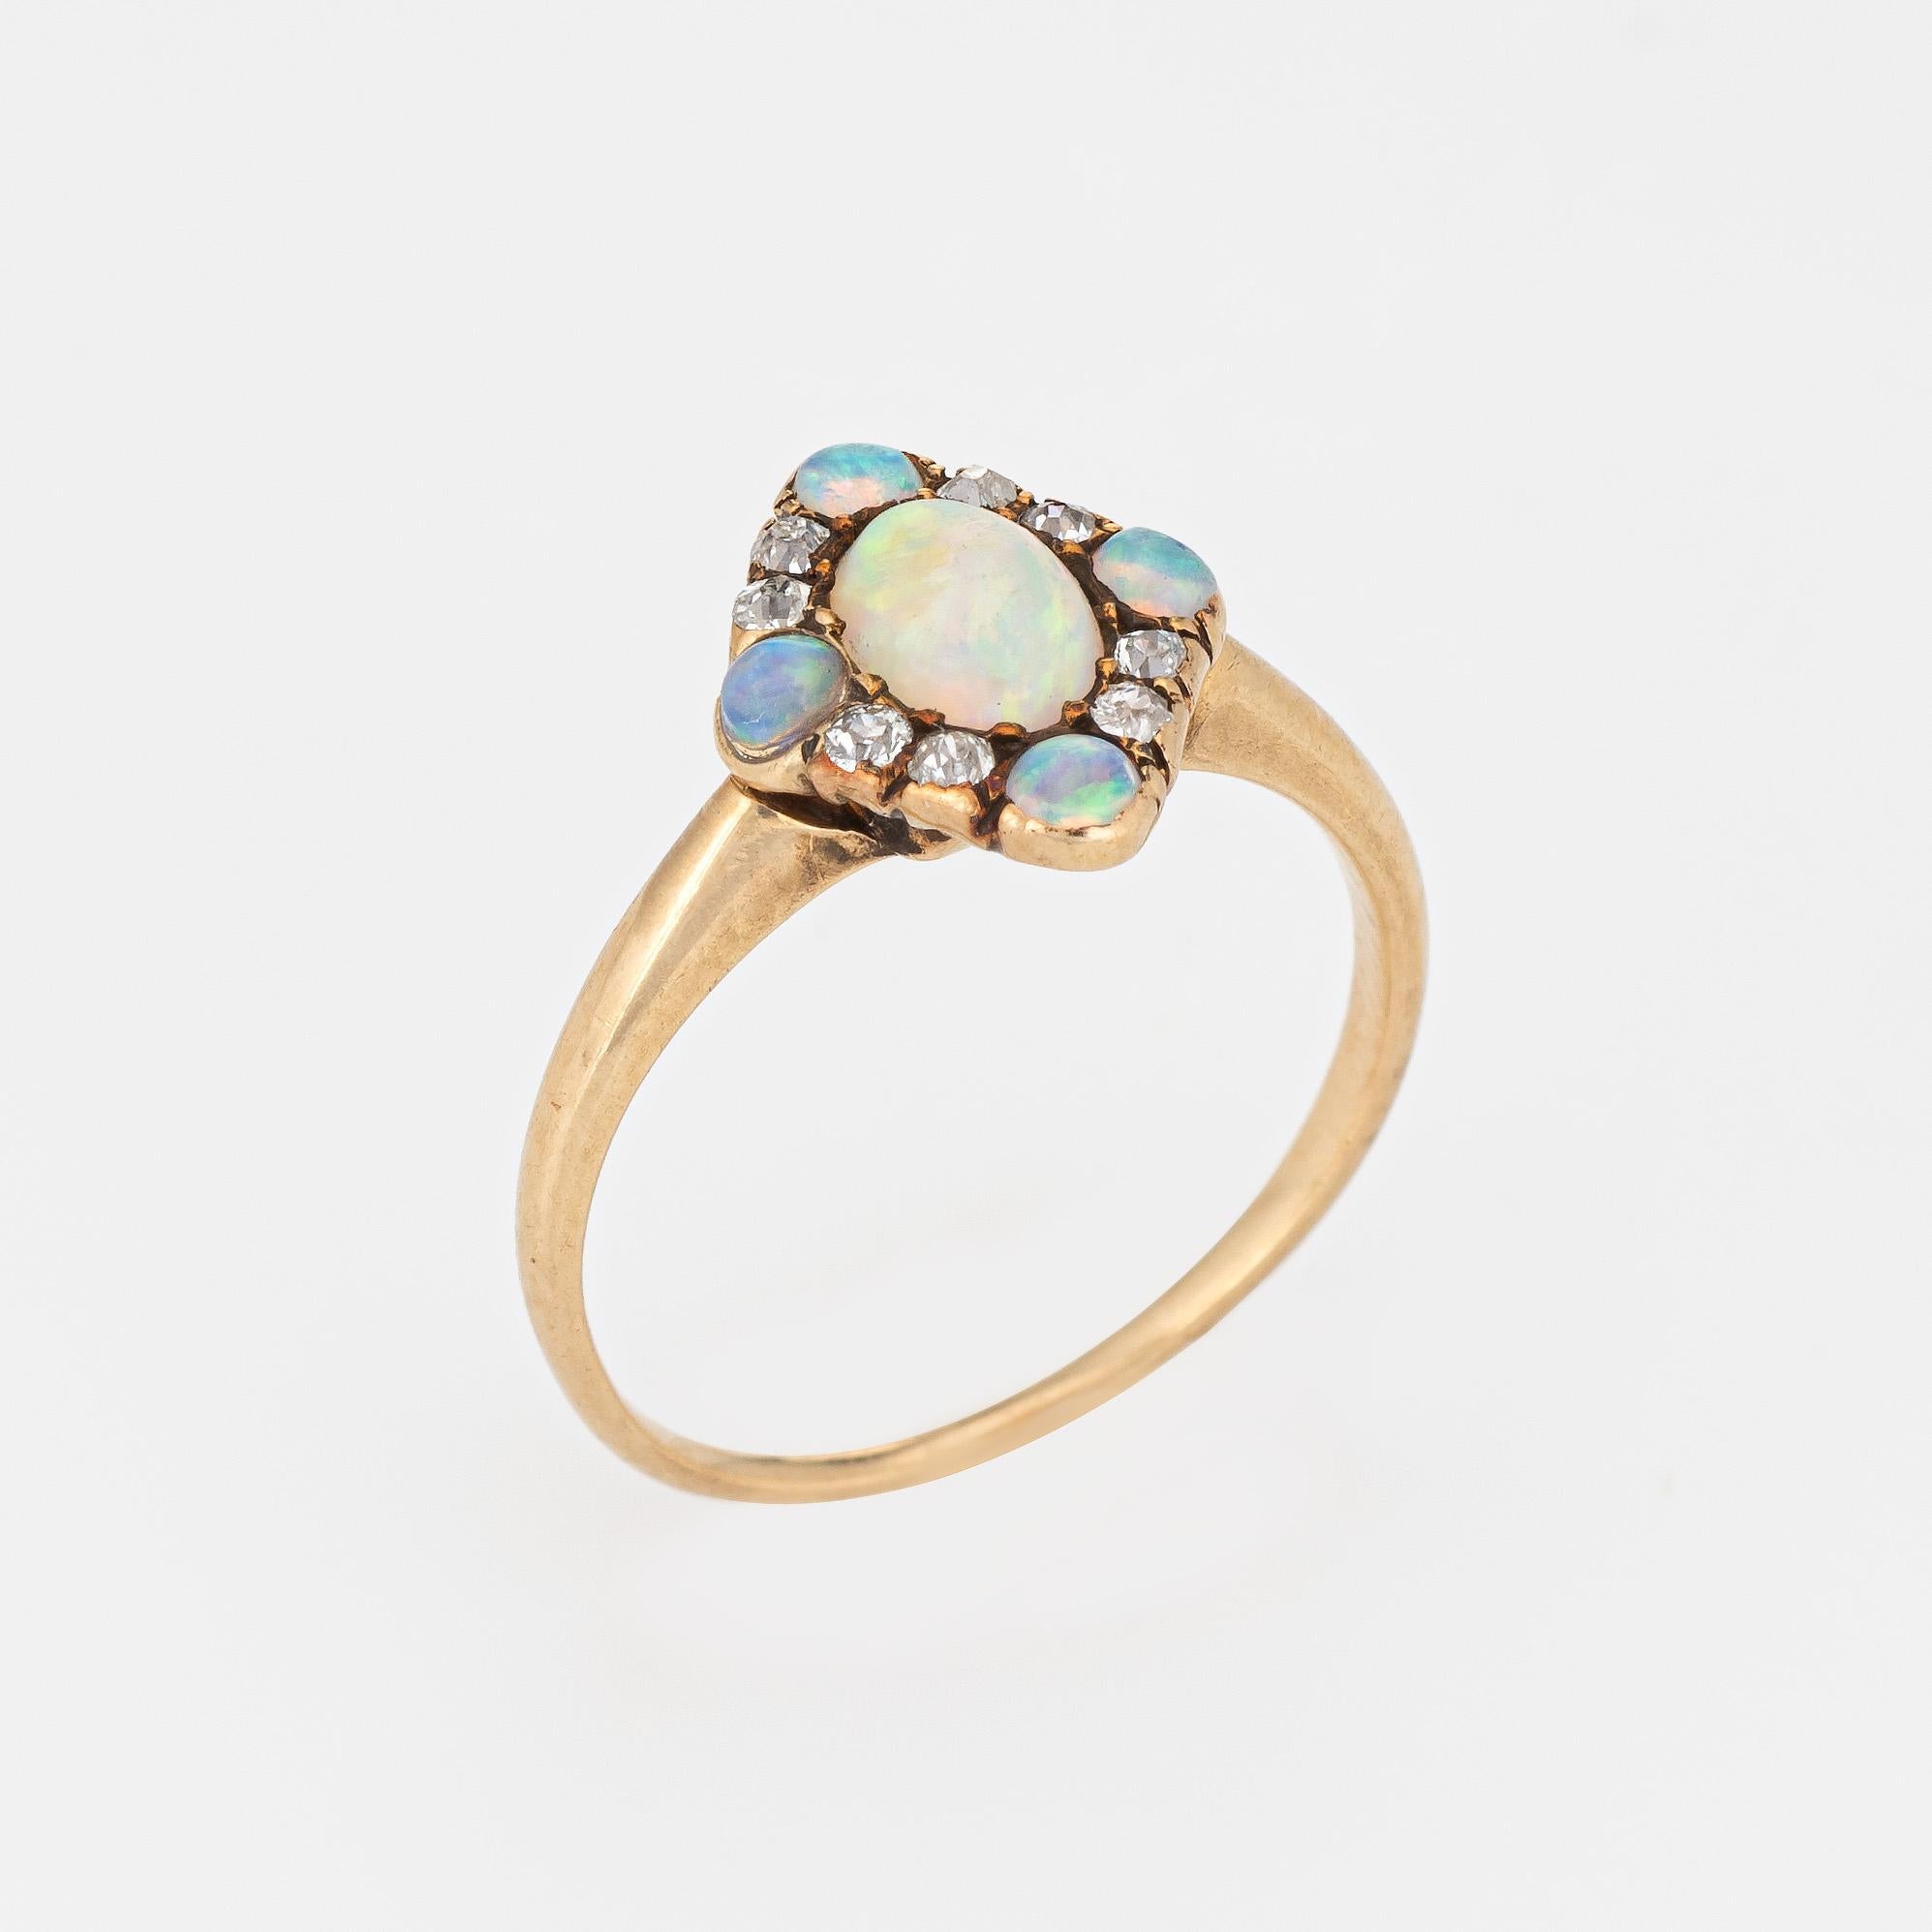 Finely detailed antique Victorian opal & diamond ring (circa 1880s to 1900s), crafted in 14 karat rose gold. 

Center set opal measures 5.5mm x 4mm (estimated at 0.30 carats), accented with a further four 2.25mm opals. Eight old mine cut diamonds